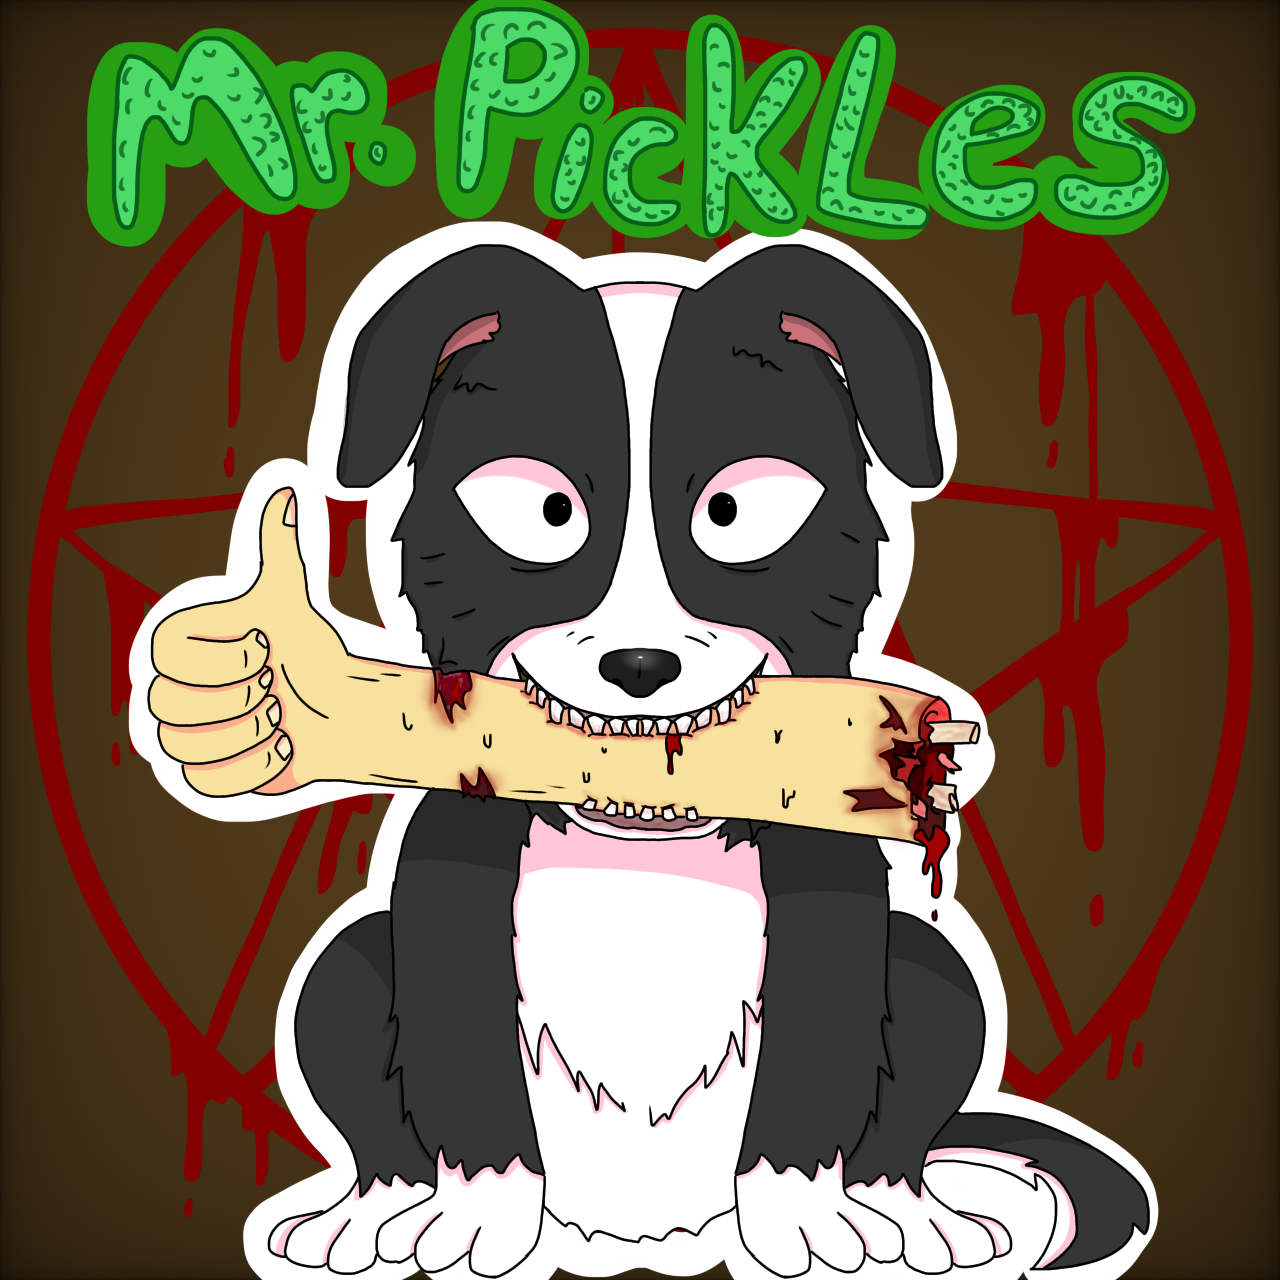 For everything Mr. Pickles